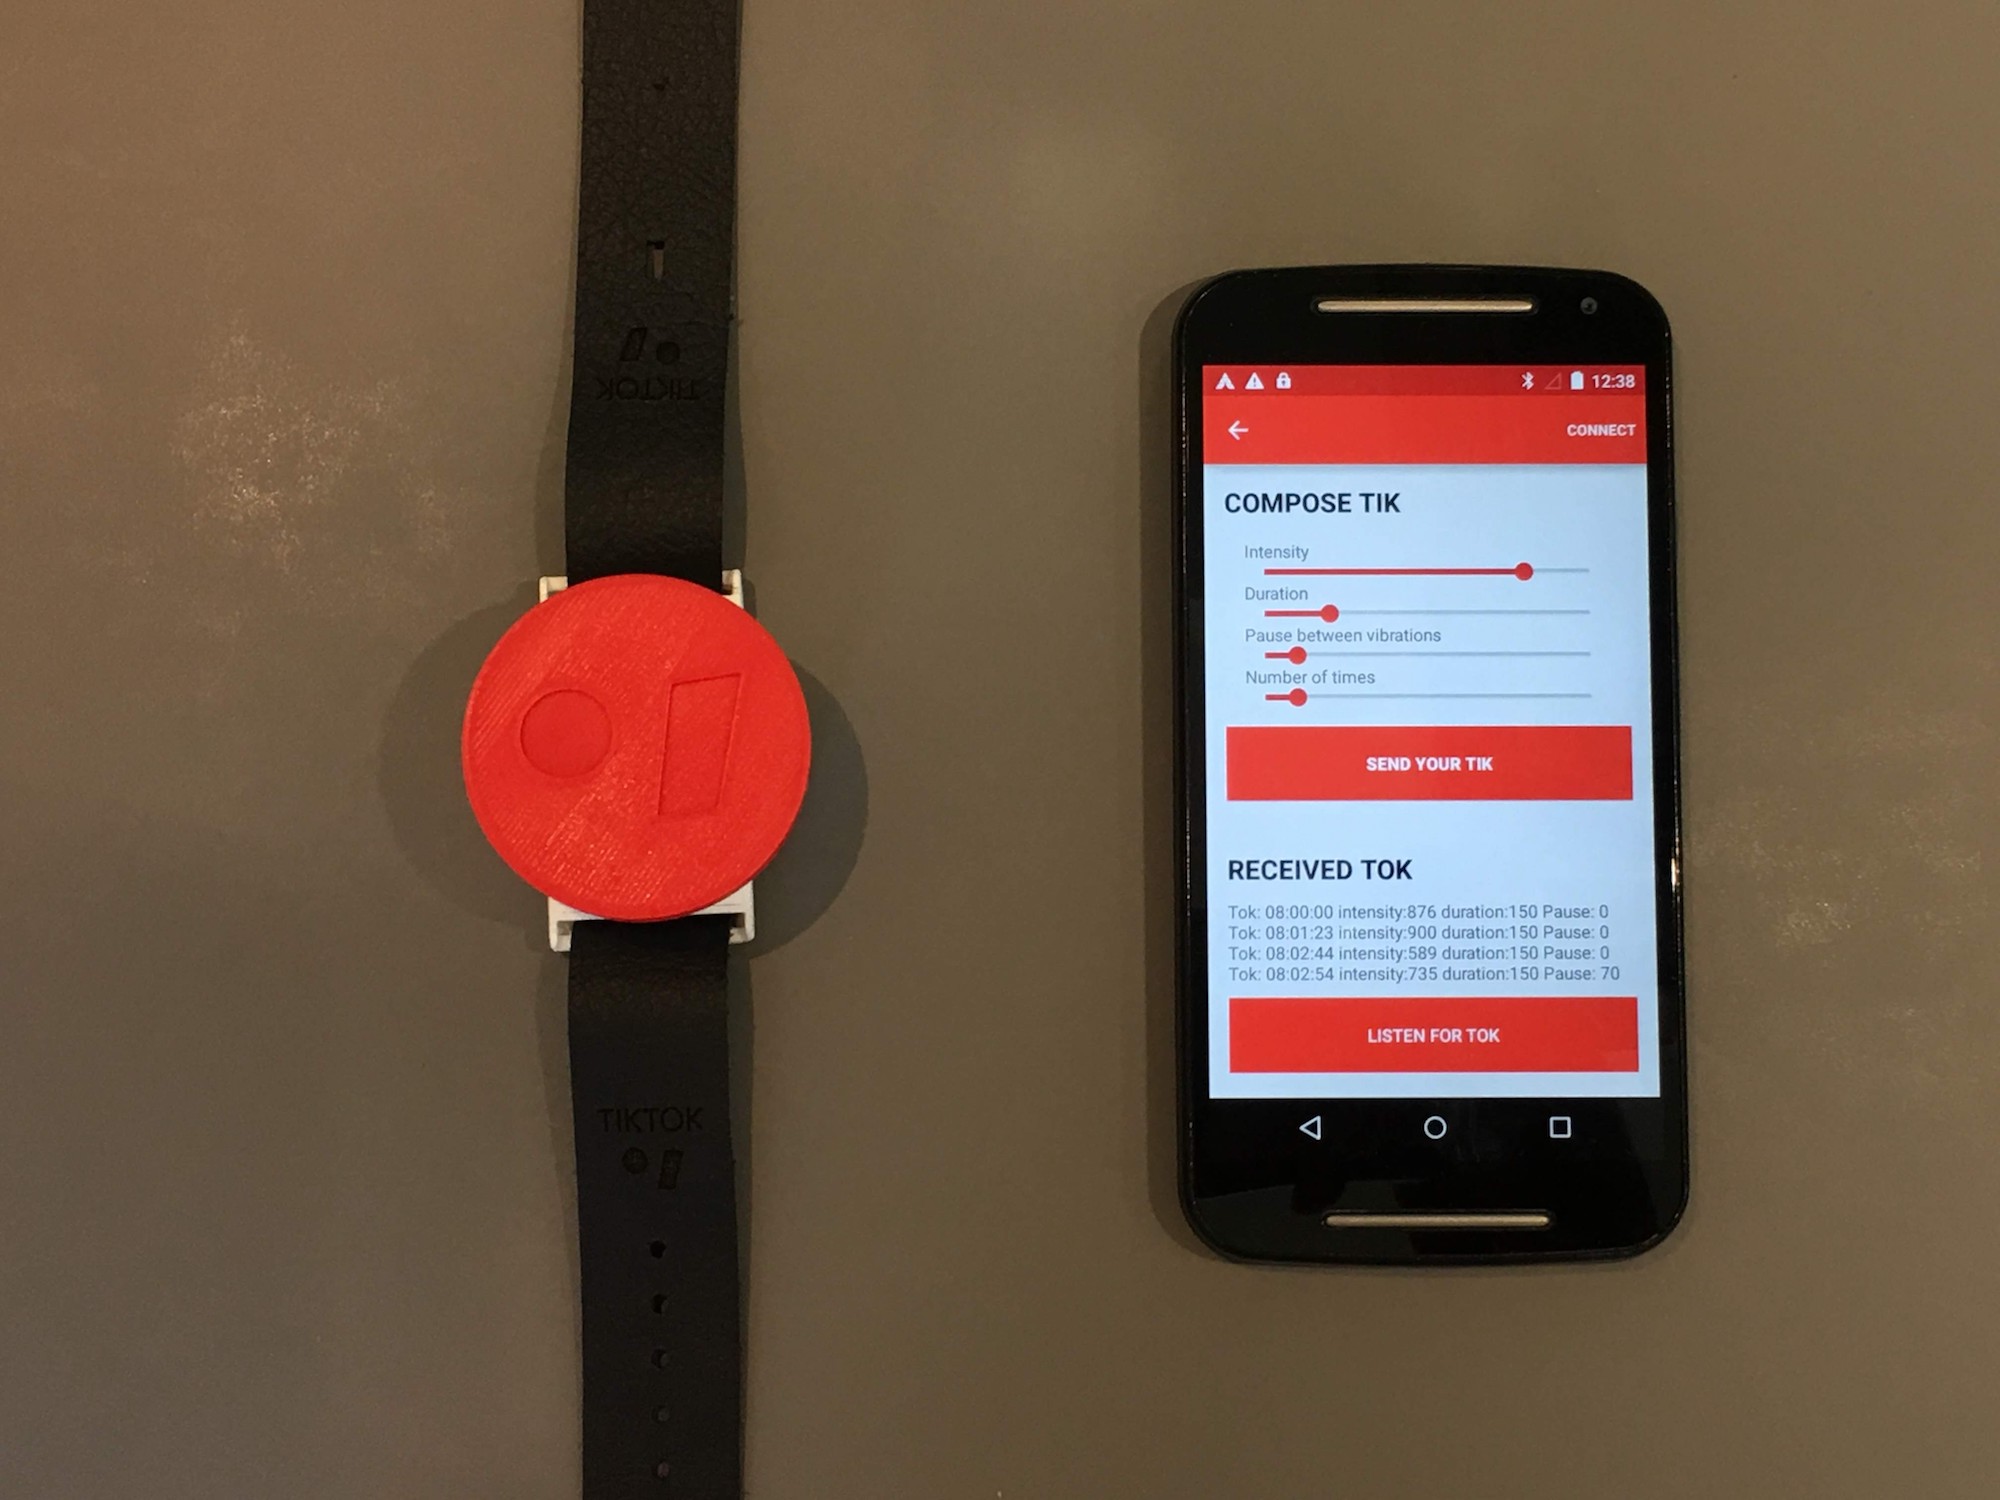 A Hero shot of my final project, a working TIKTOK band detecting taps, vibrating and communicating with the TIKTOK app via Bluetooth